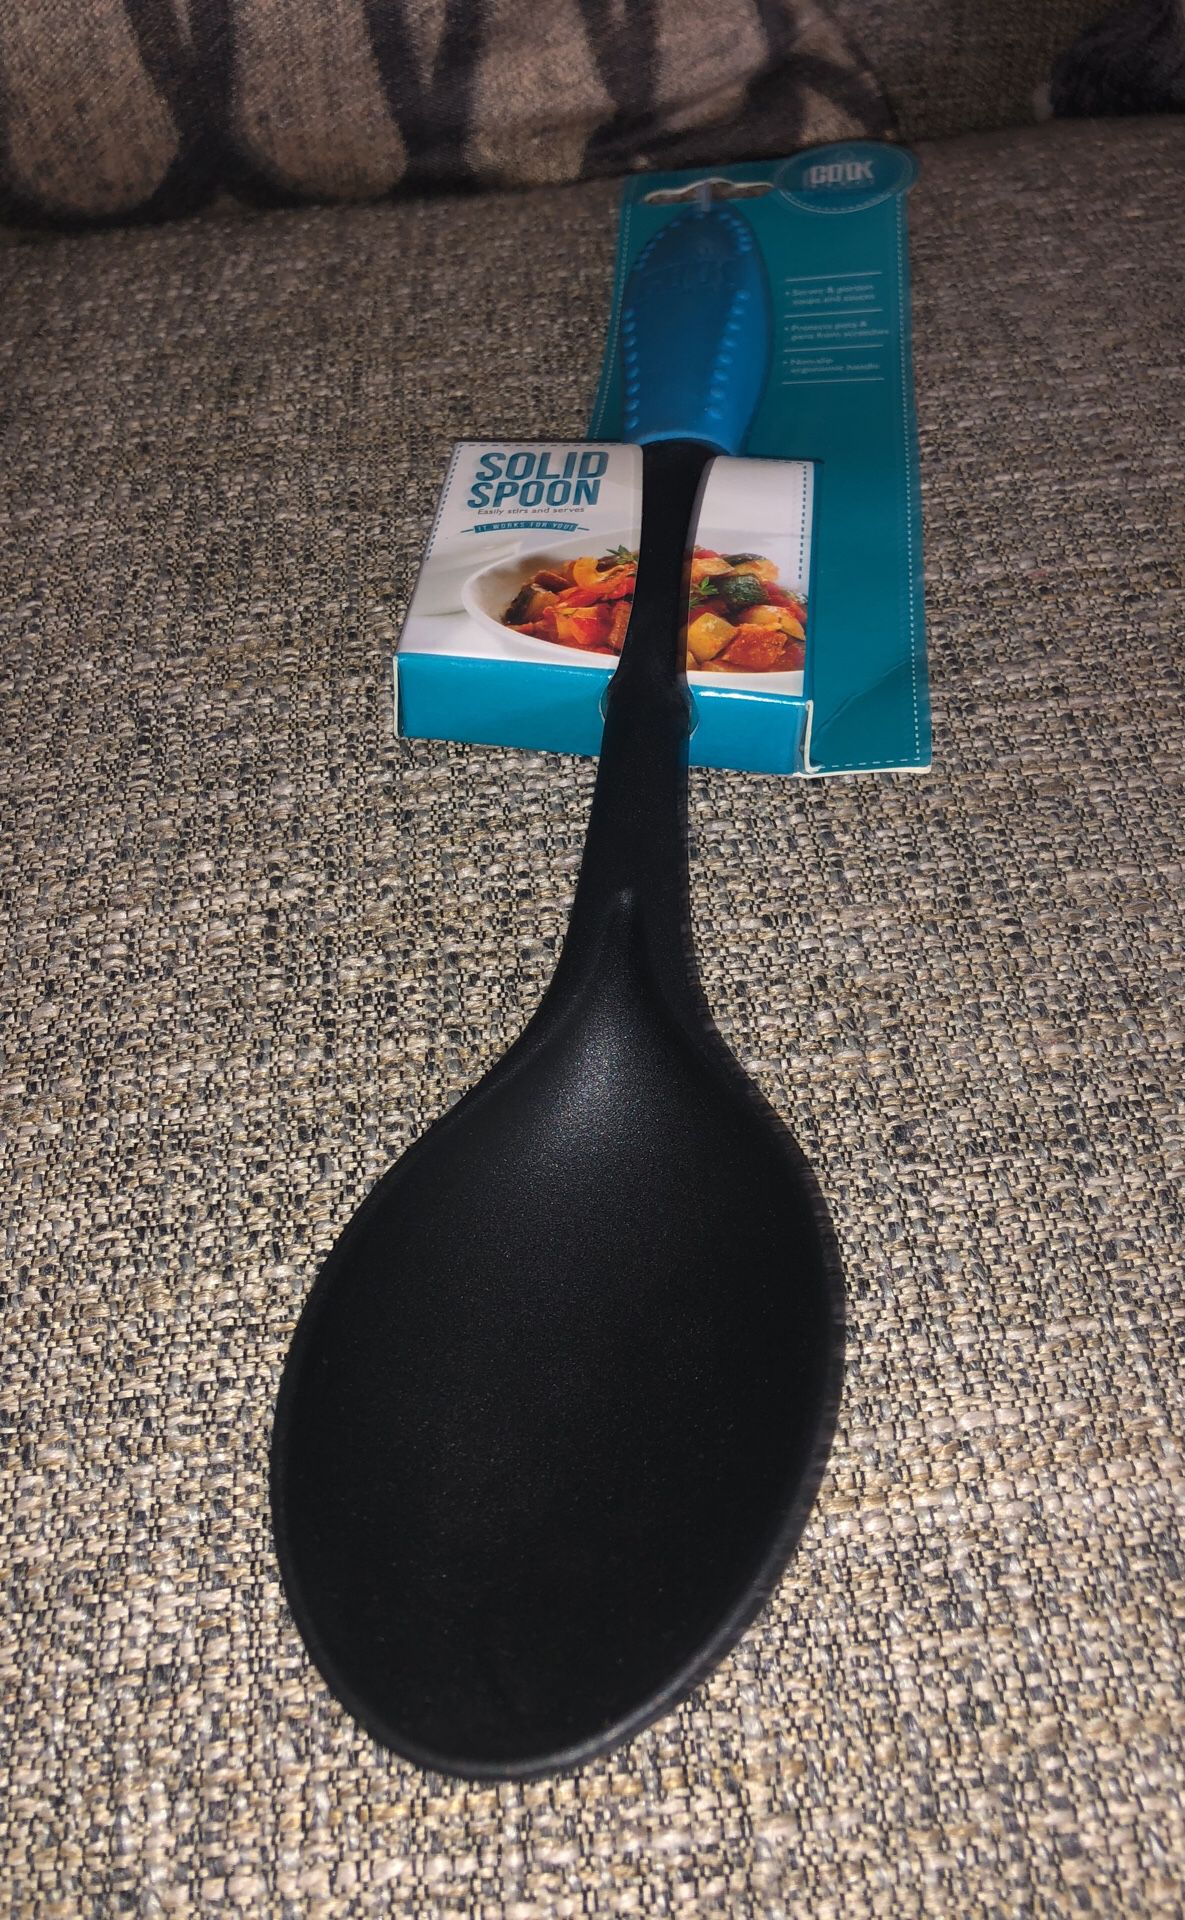 One serving spoon. Please see all the pictures and read the description